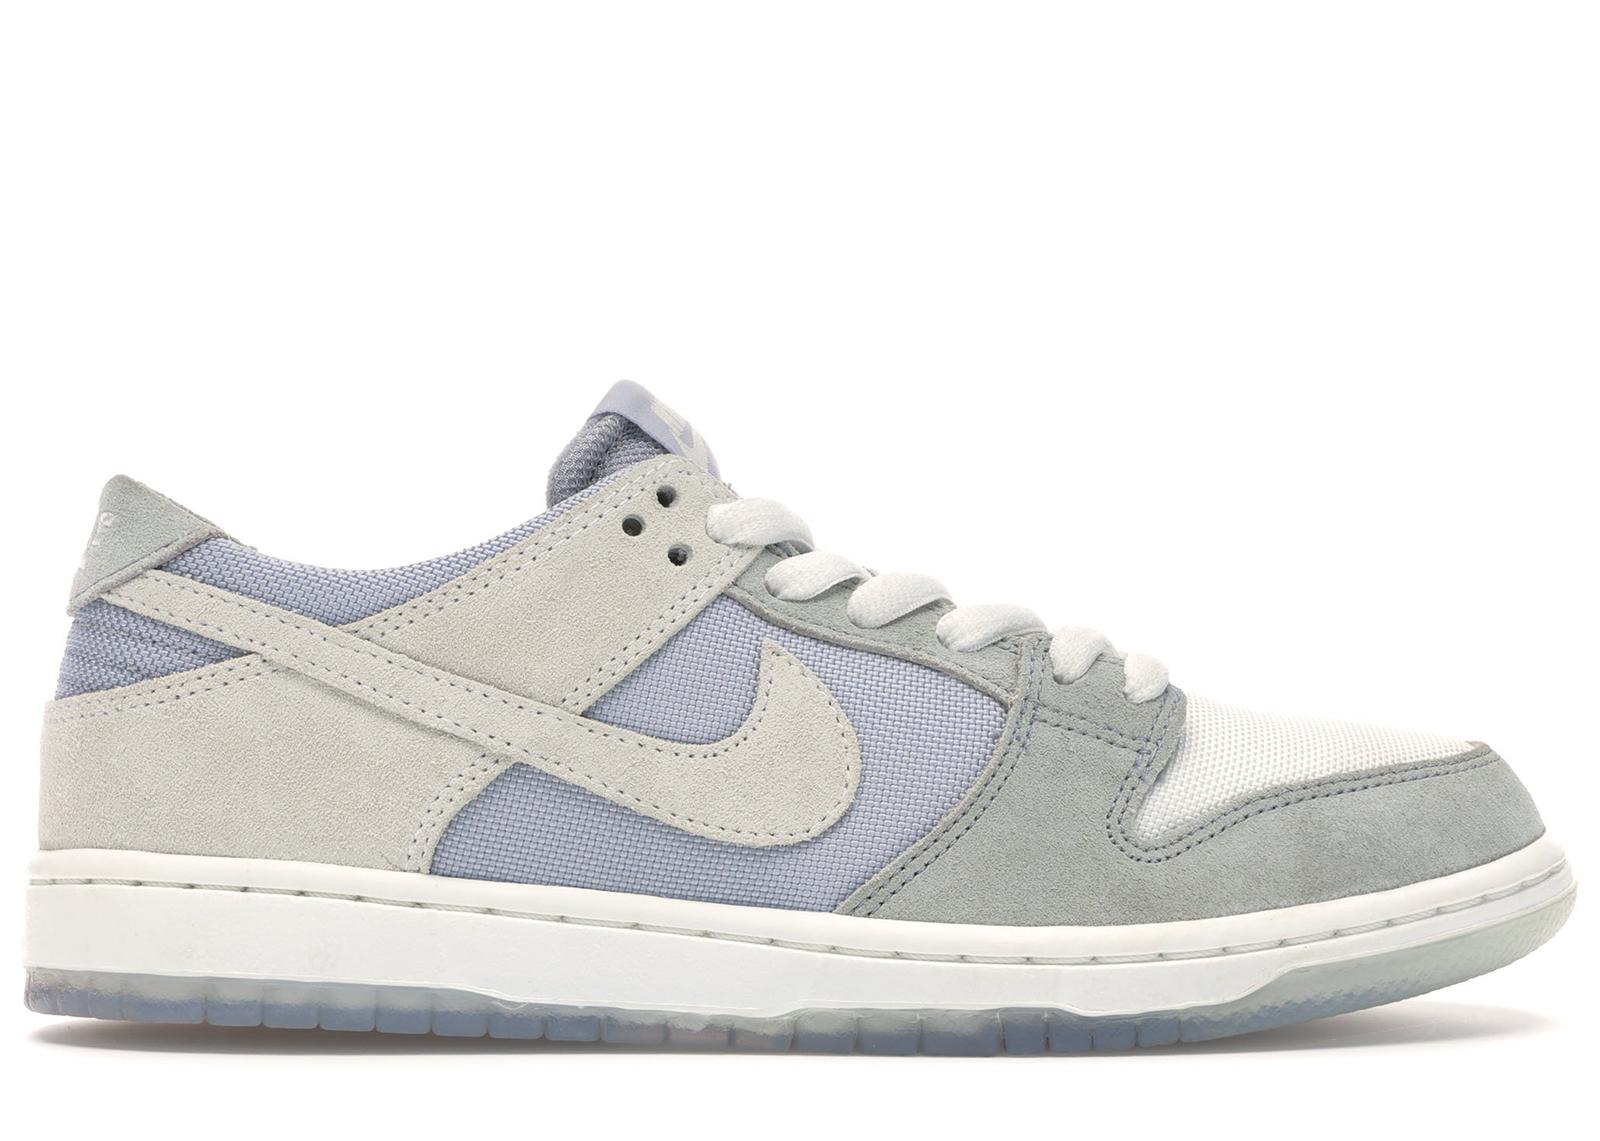 Nike Sb Dunk Low Wolf Grey in Gray for Men - Lyst